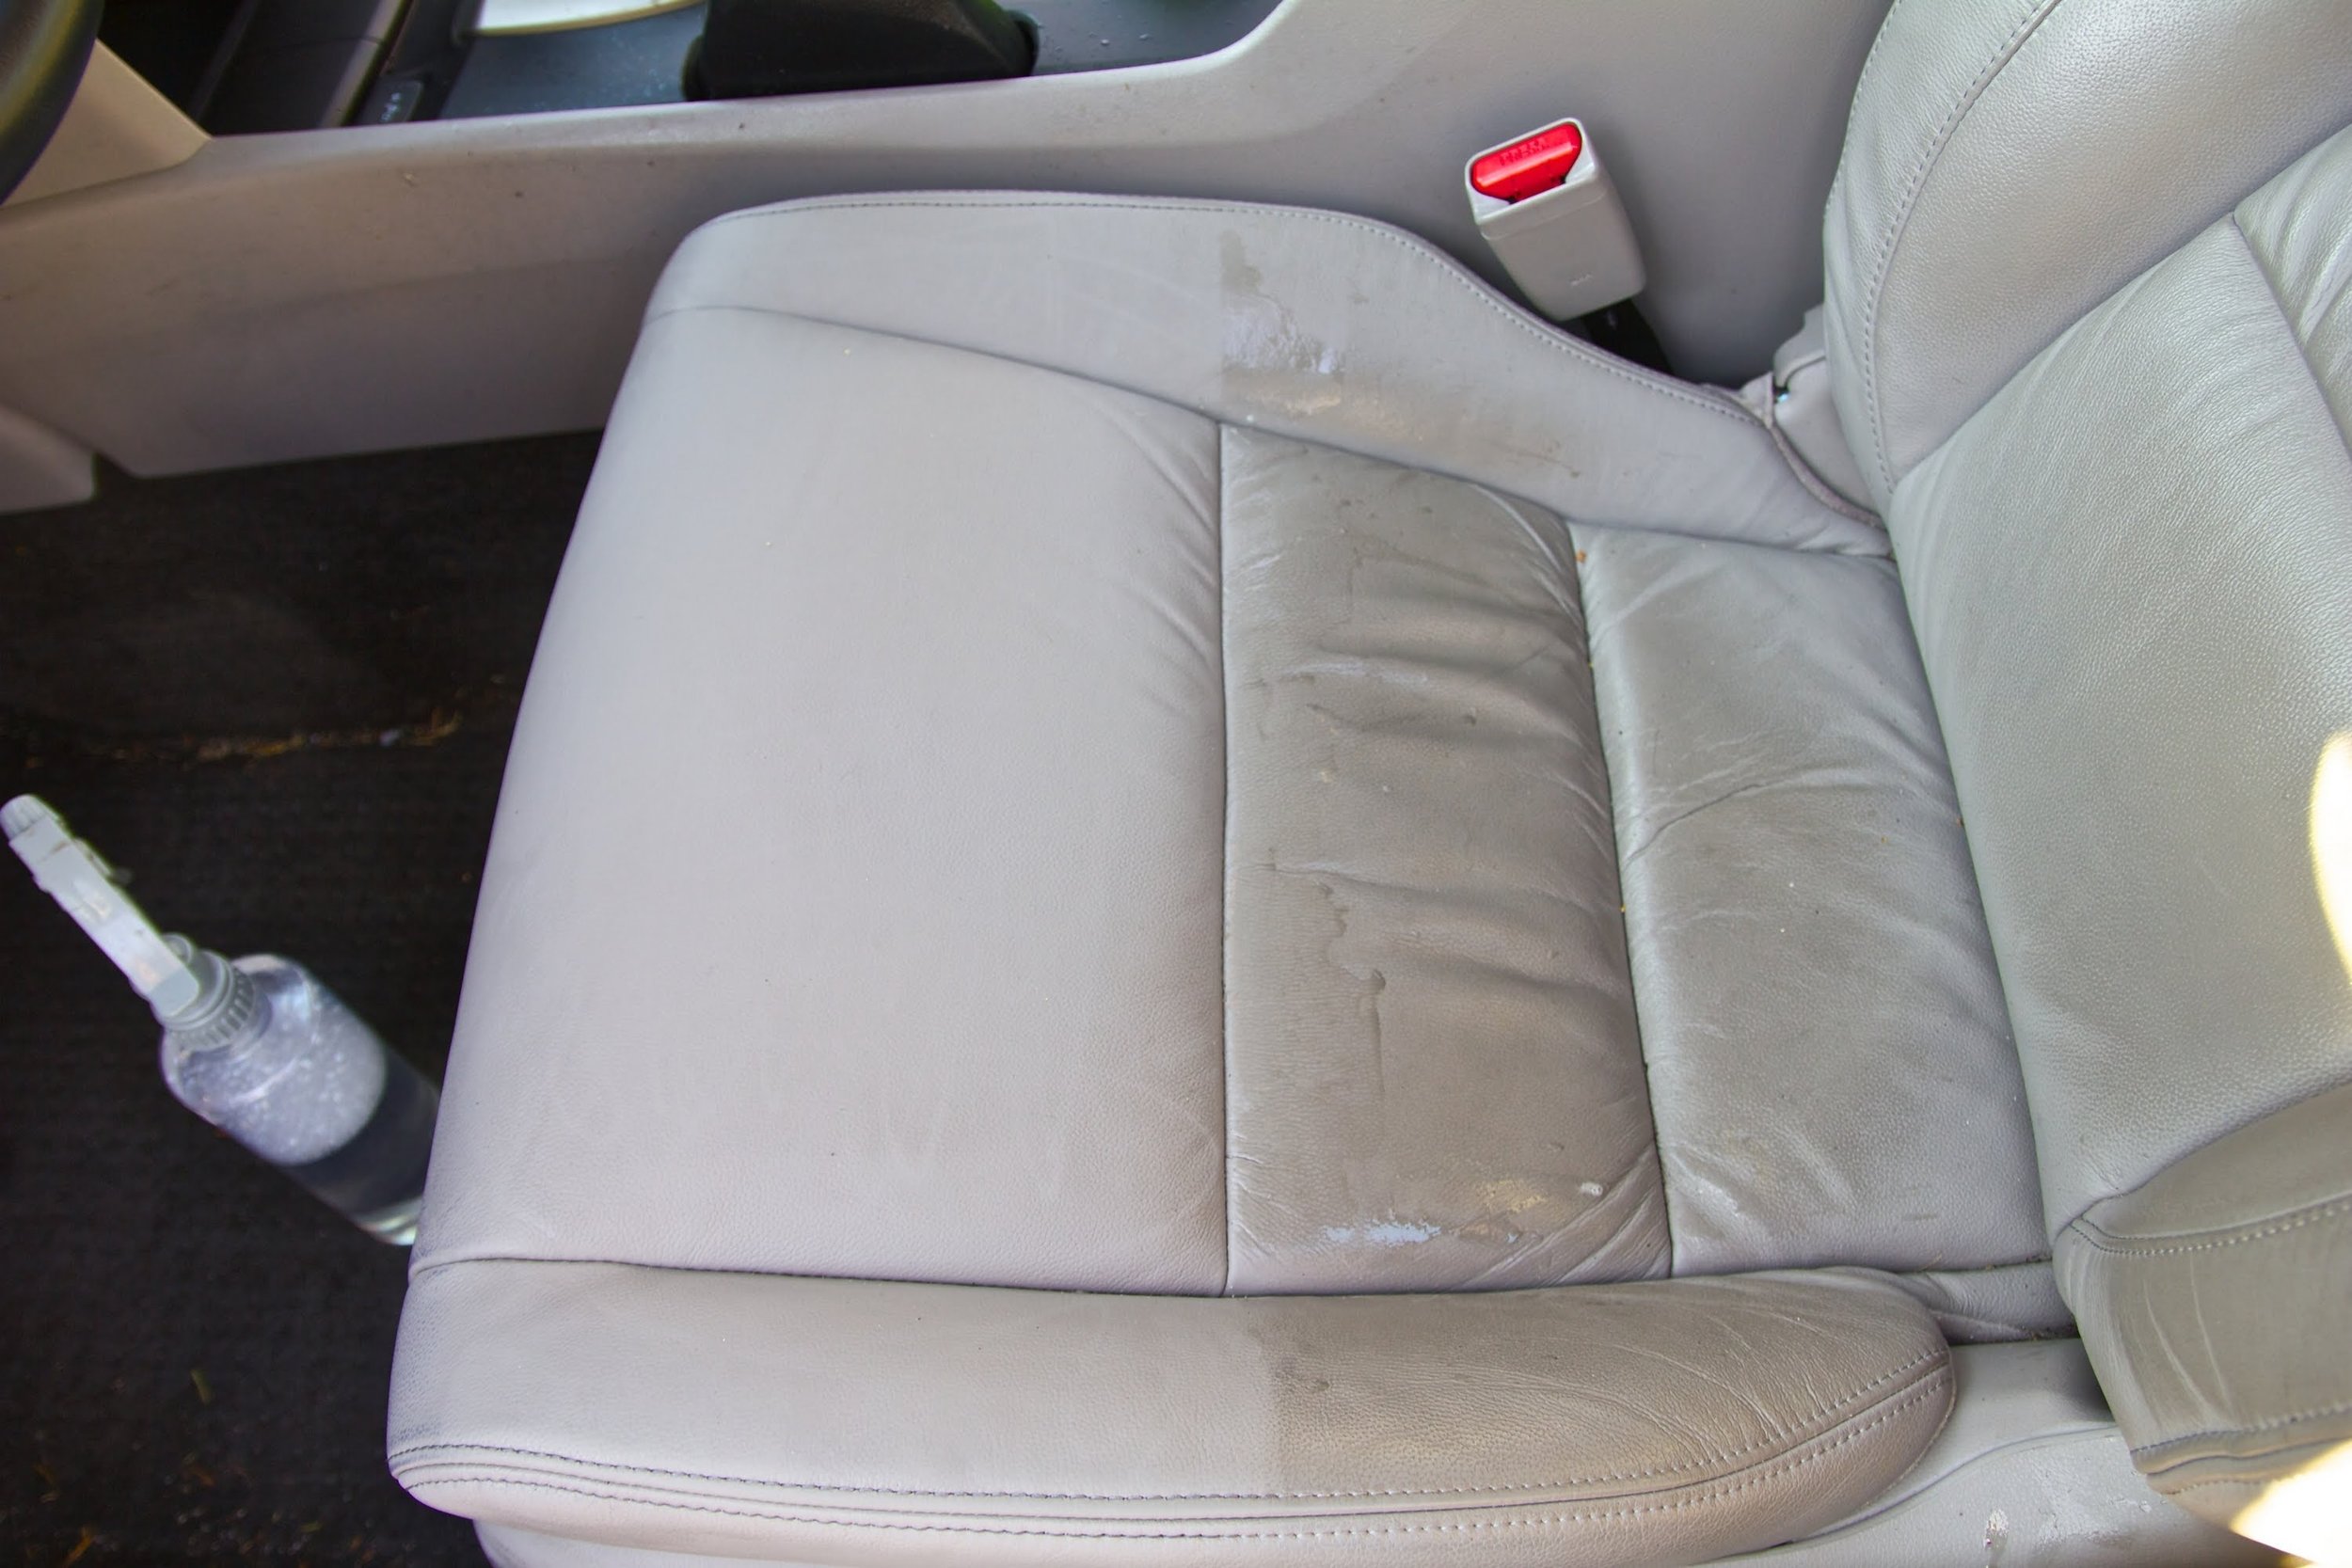 Mobile Car Detailing Winston M Nc How To Clean Condition Leather Seats Guide - How Do I Remove Paint From Leather Car Seats